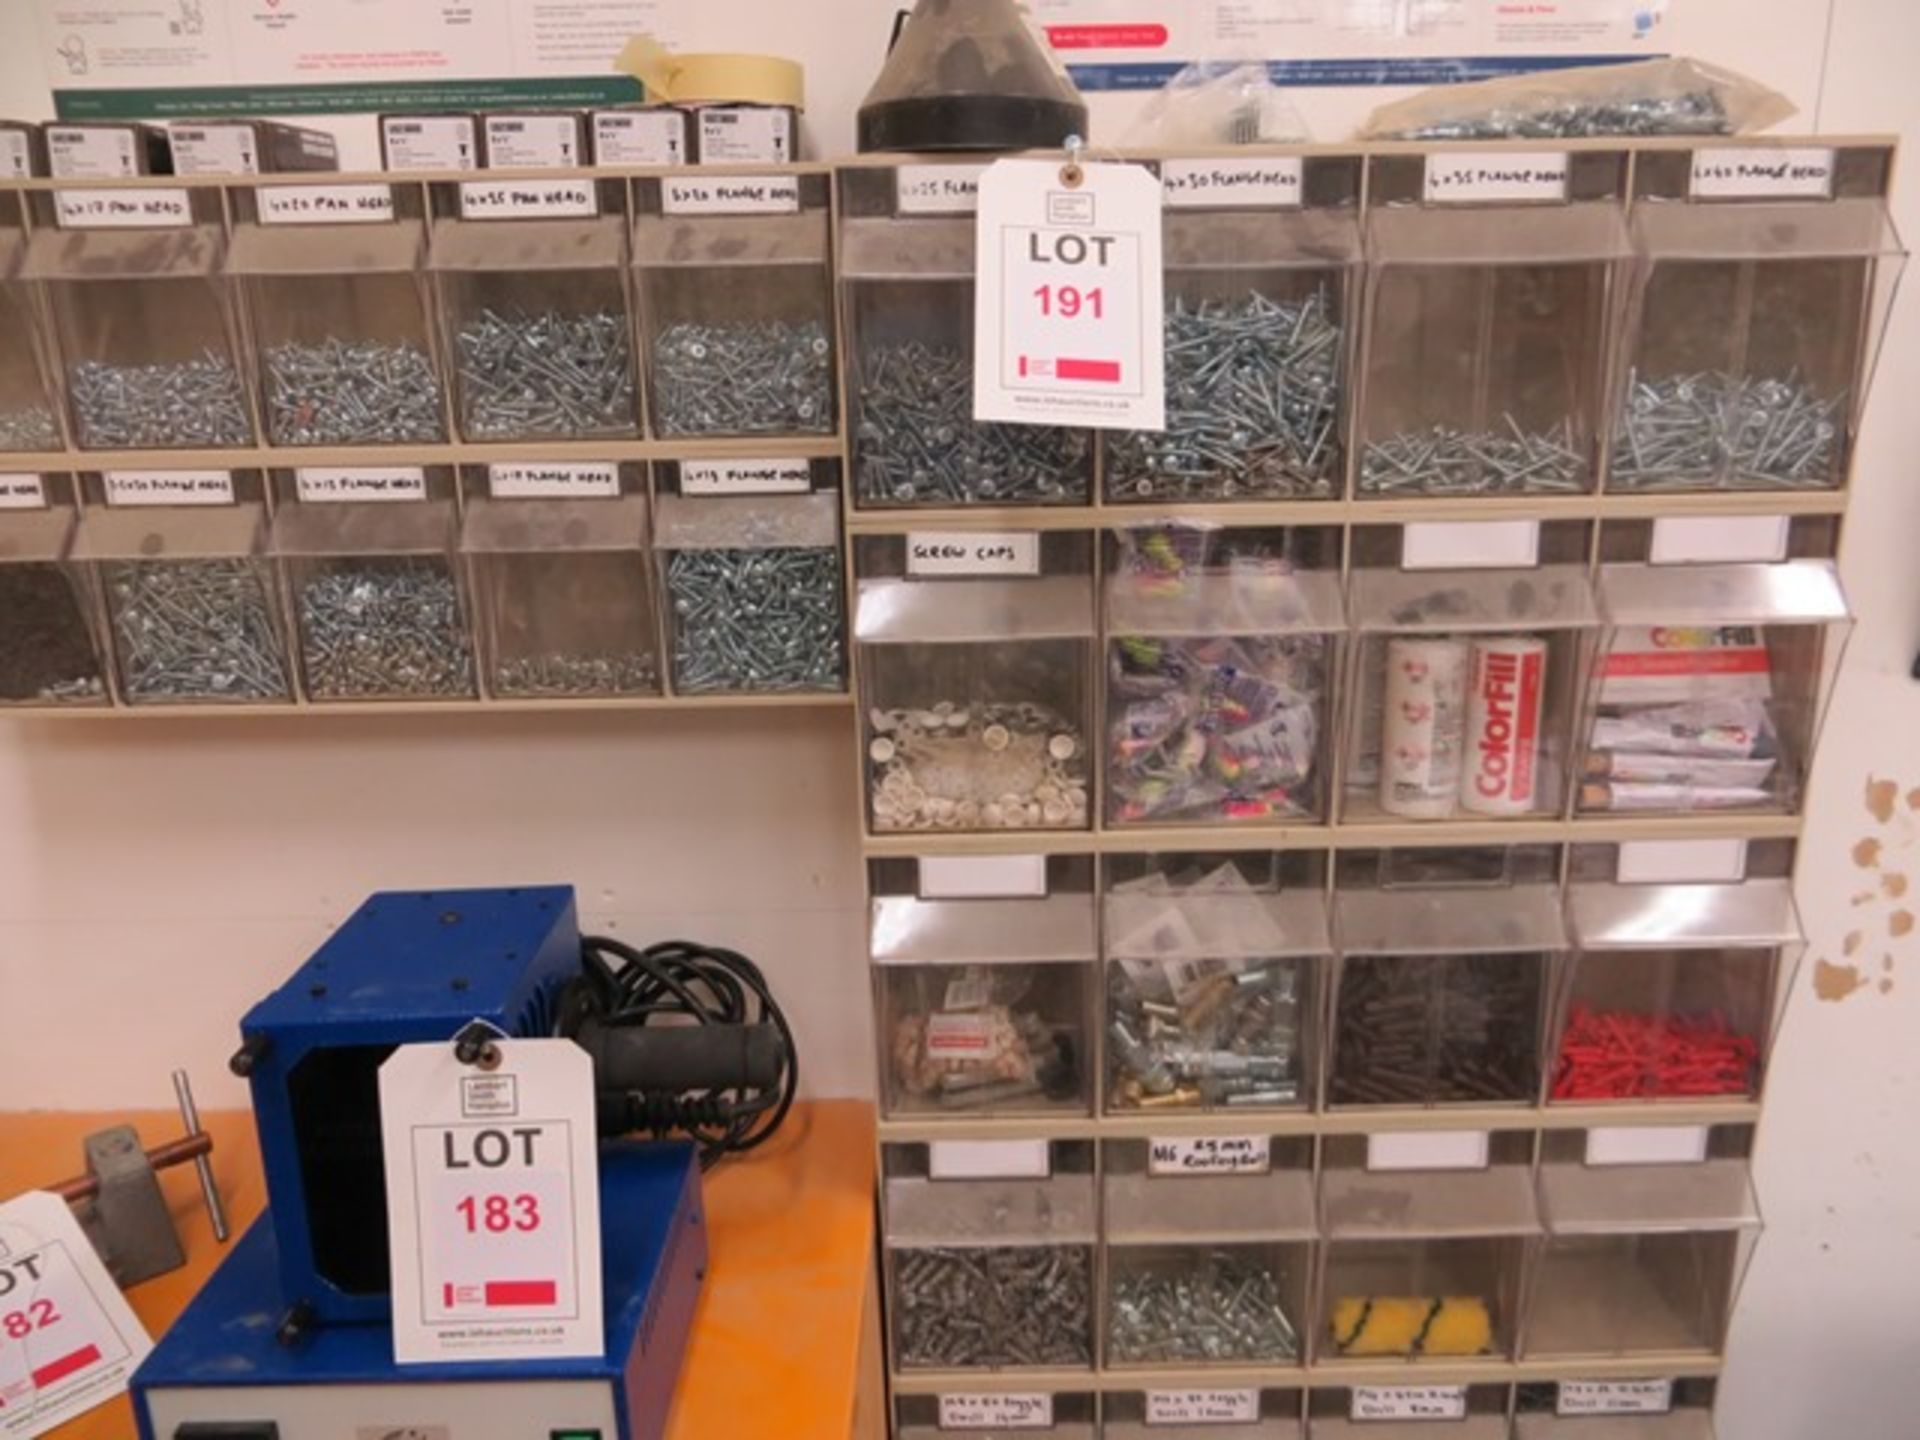 Wall Mounted 34 Position Perspex Fronted Storage Unit c/w Screws & Fixings Etc., as lotted